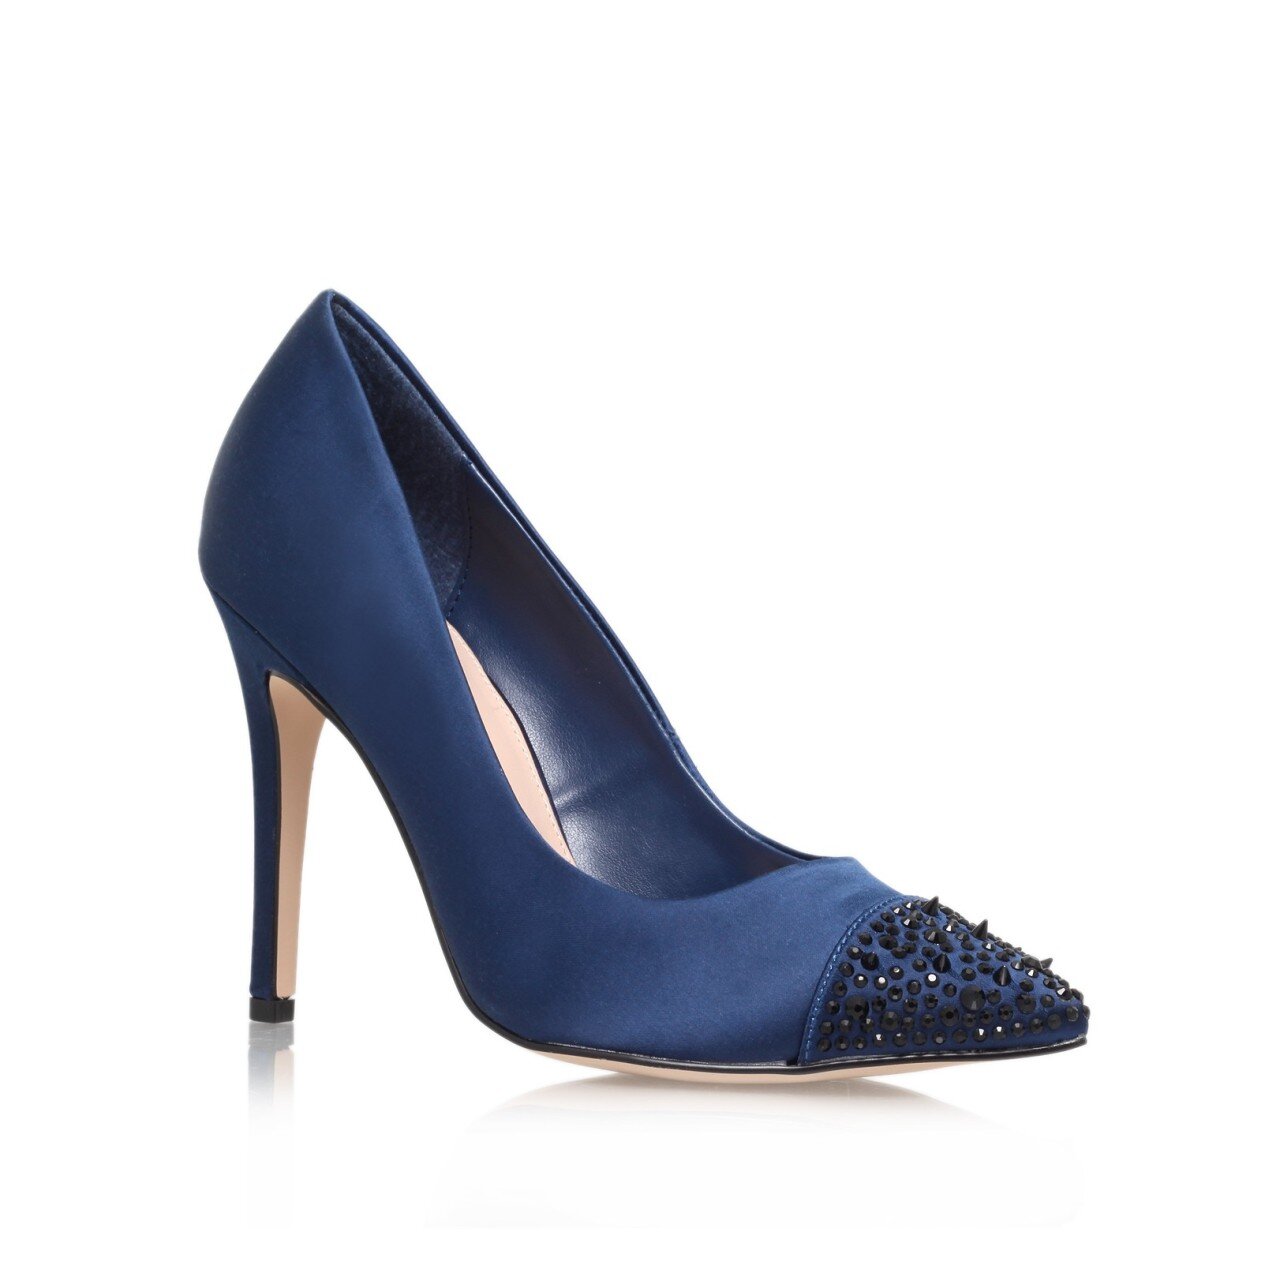 Carvela Lacey Court Shoes in Navy Satin.jpg